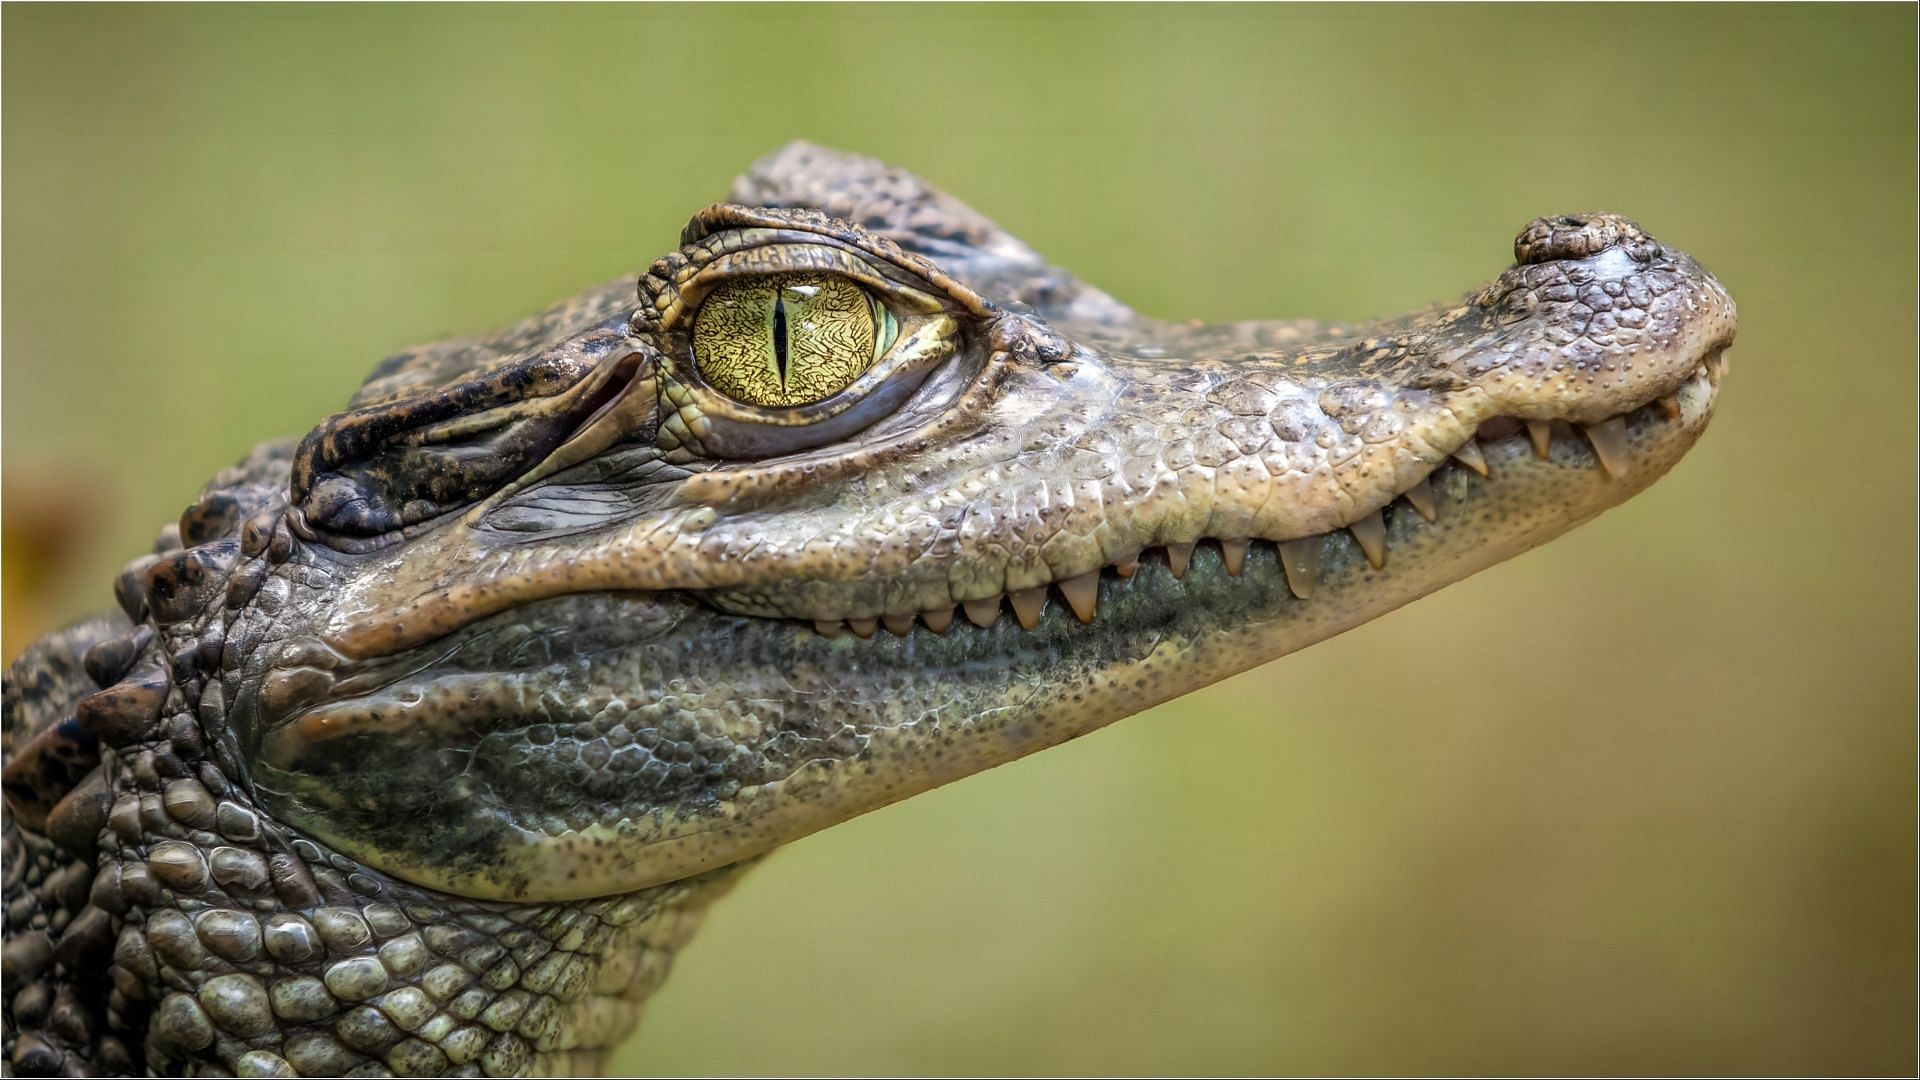 An alligator was captured by DEC and the owner is now fighting for his freedom (Representative image via Unsplash)